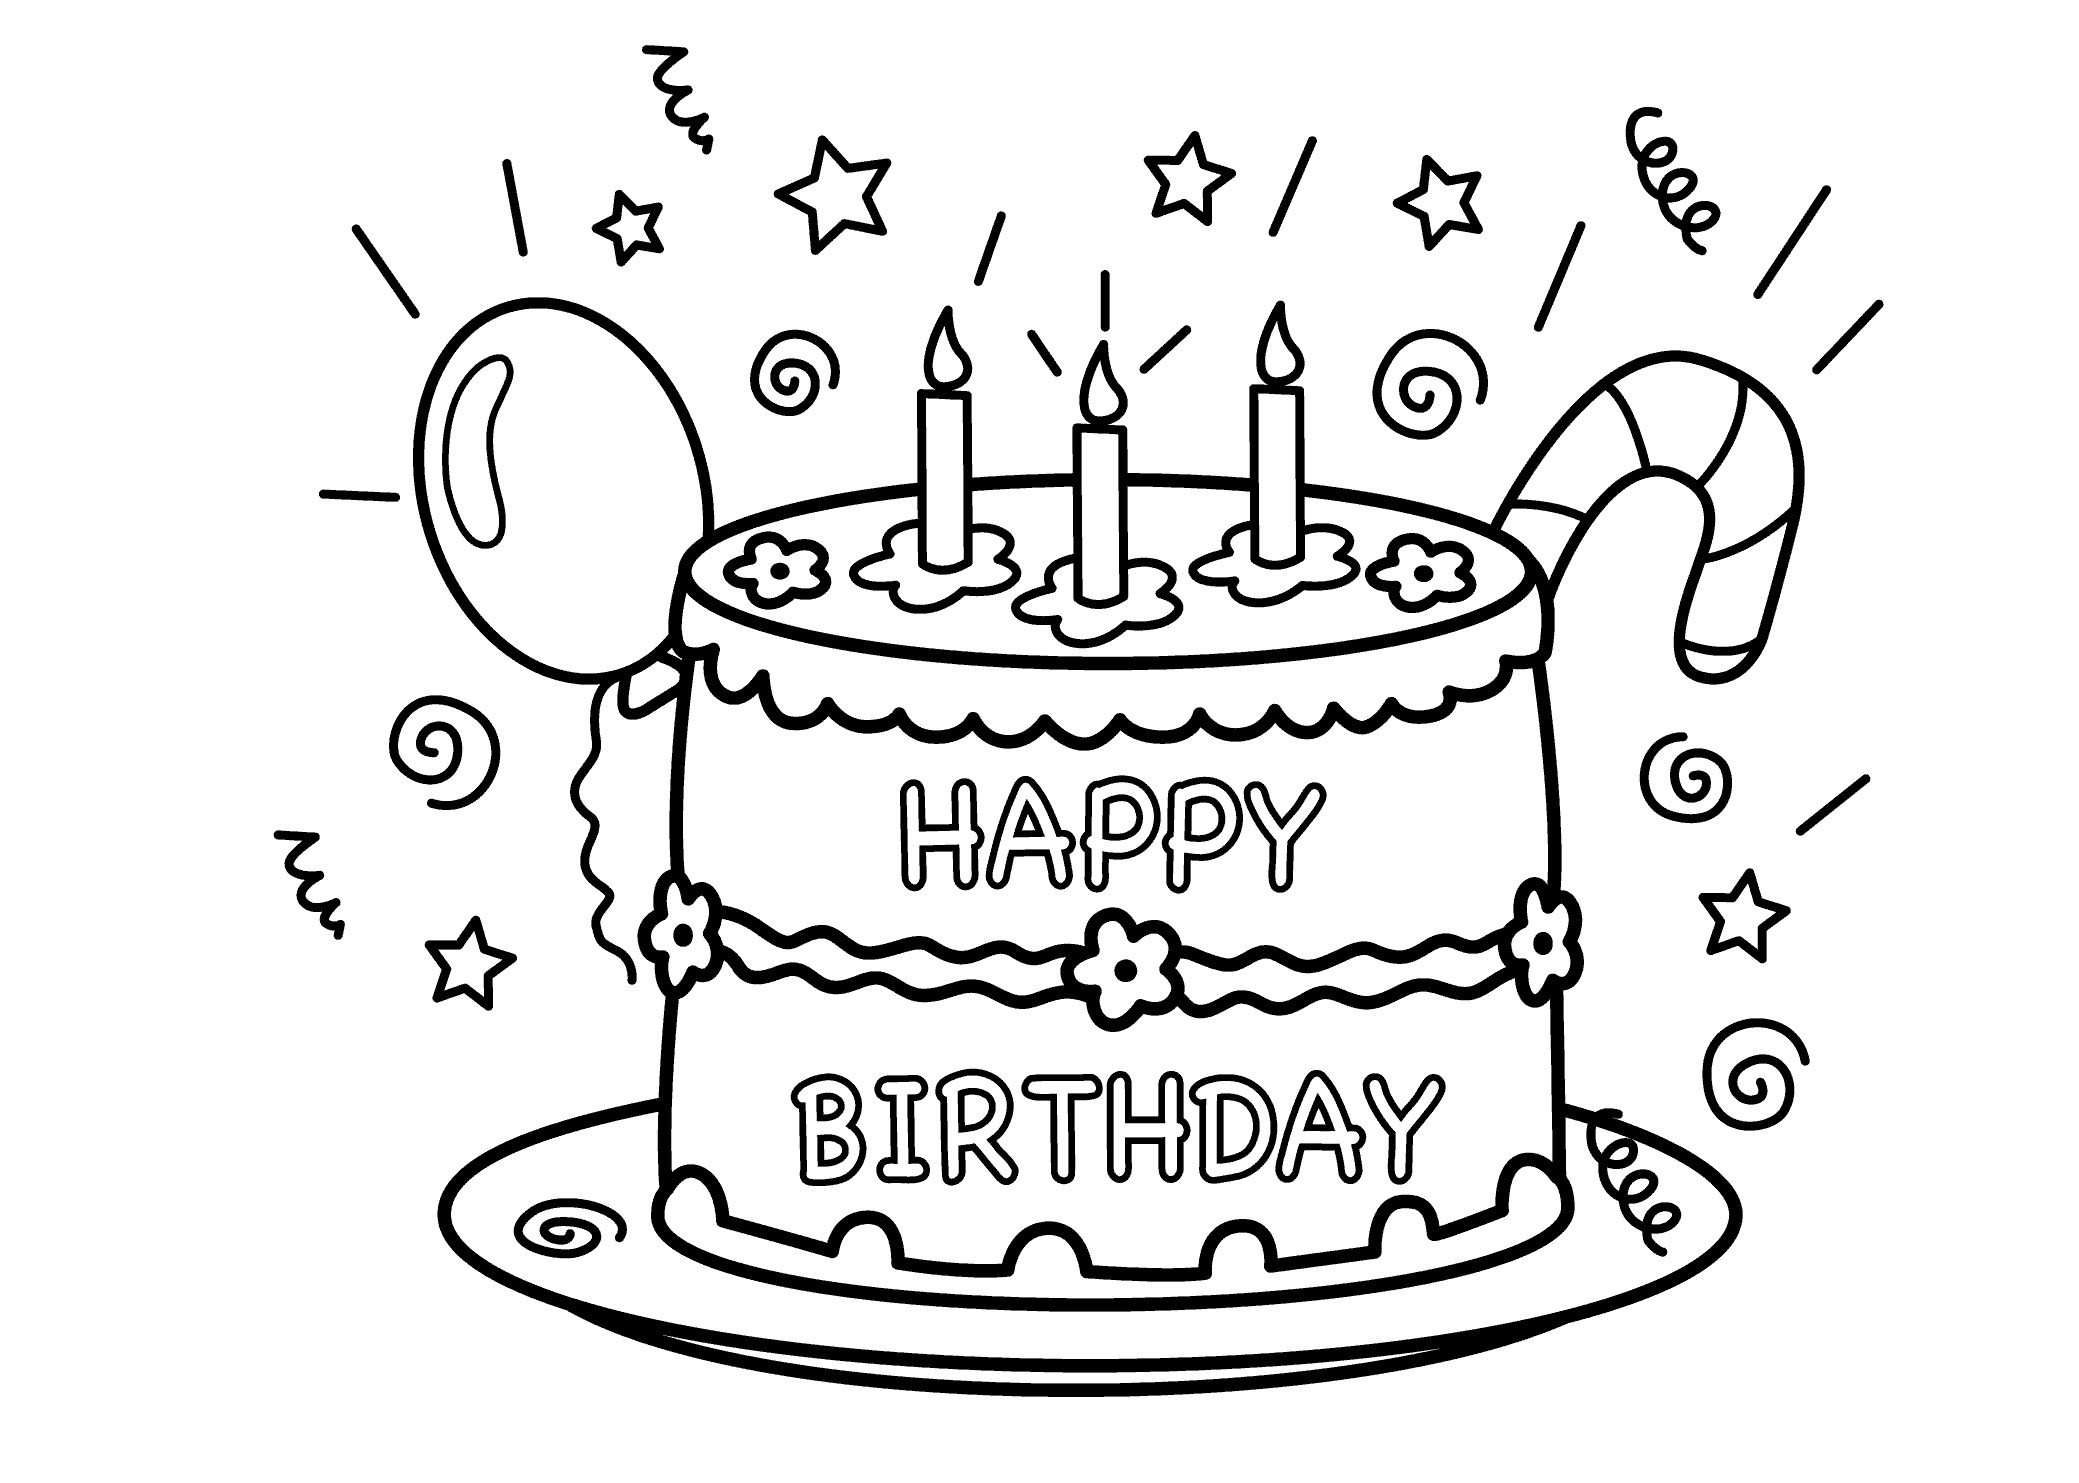 Hello Kitty Birthday Cake Coloring Page